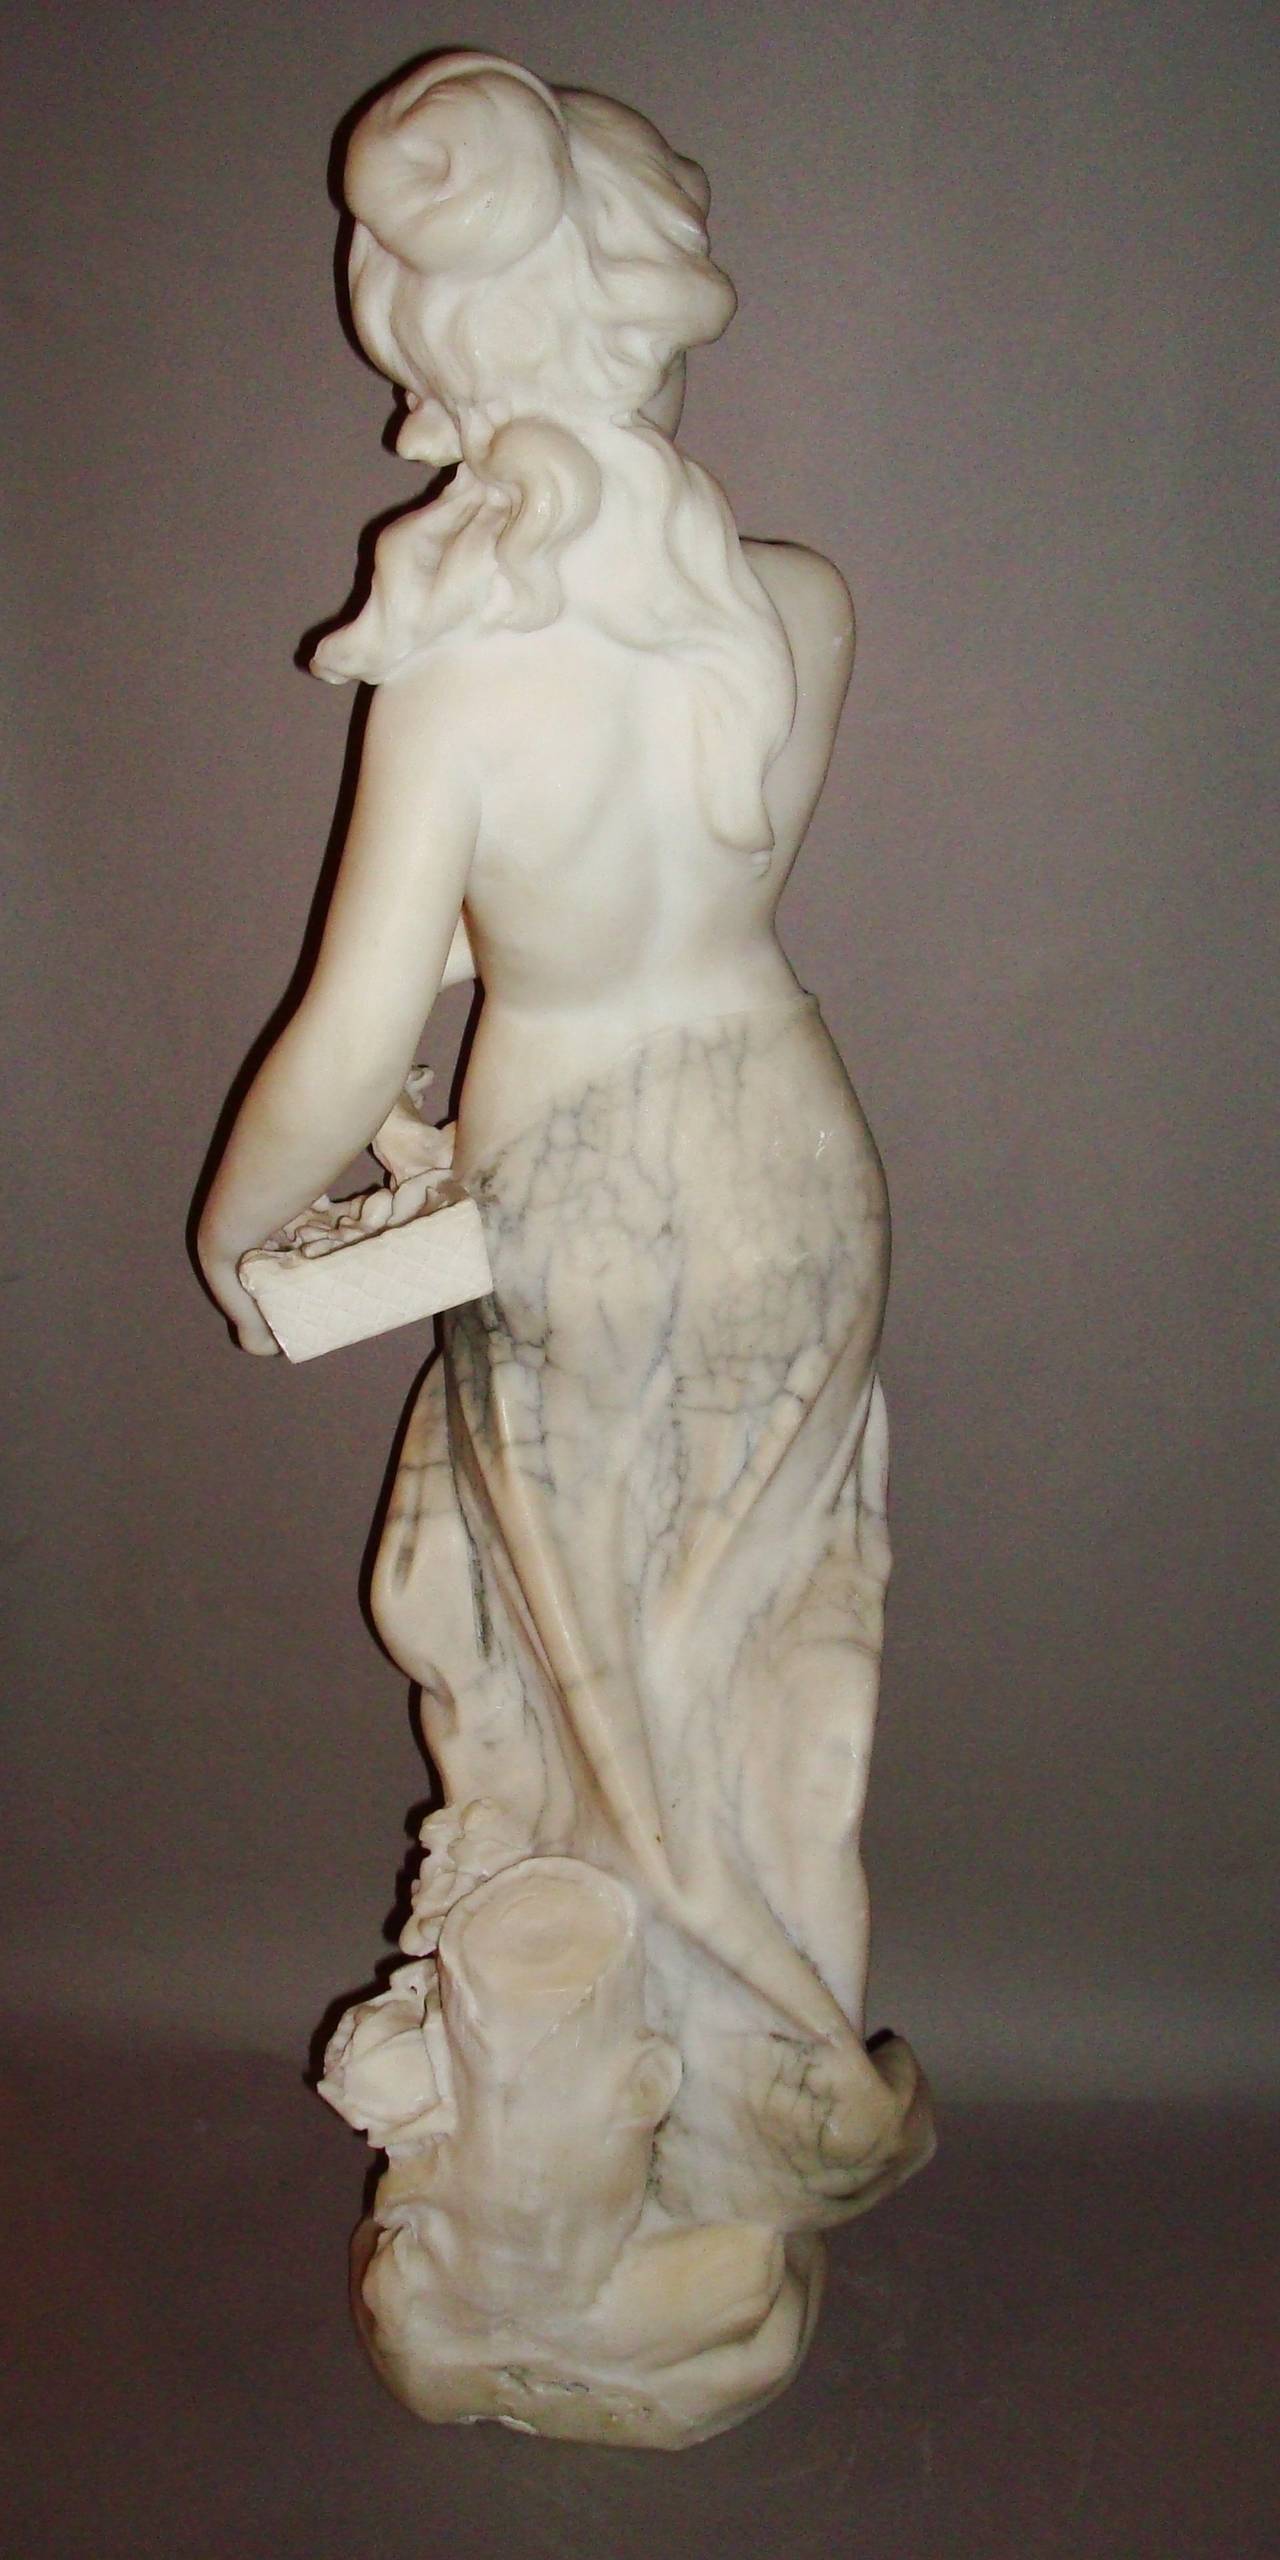 20th Century An Early C20th Marble Sculpture of a Young Woman